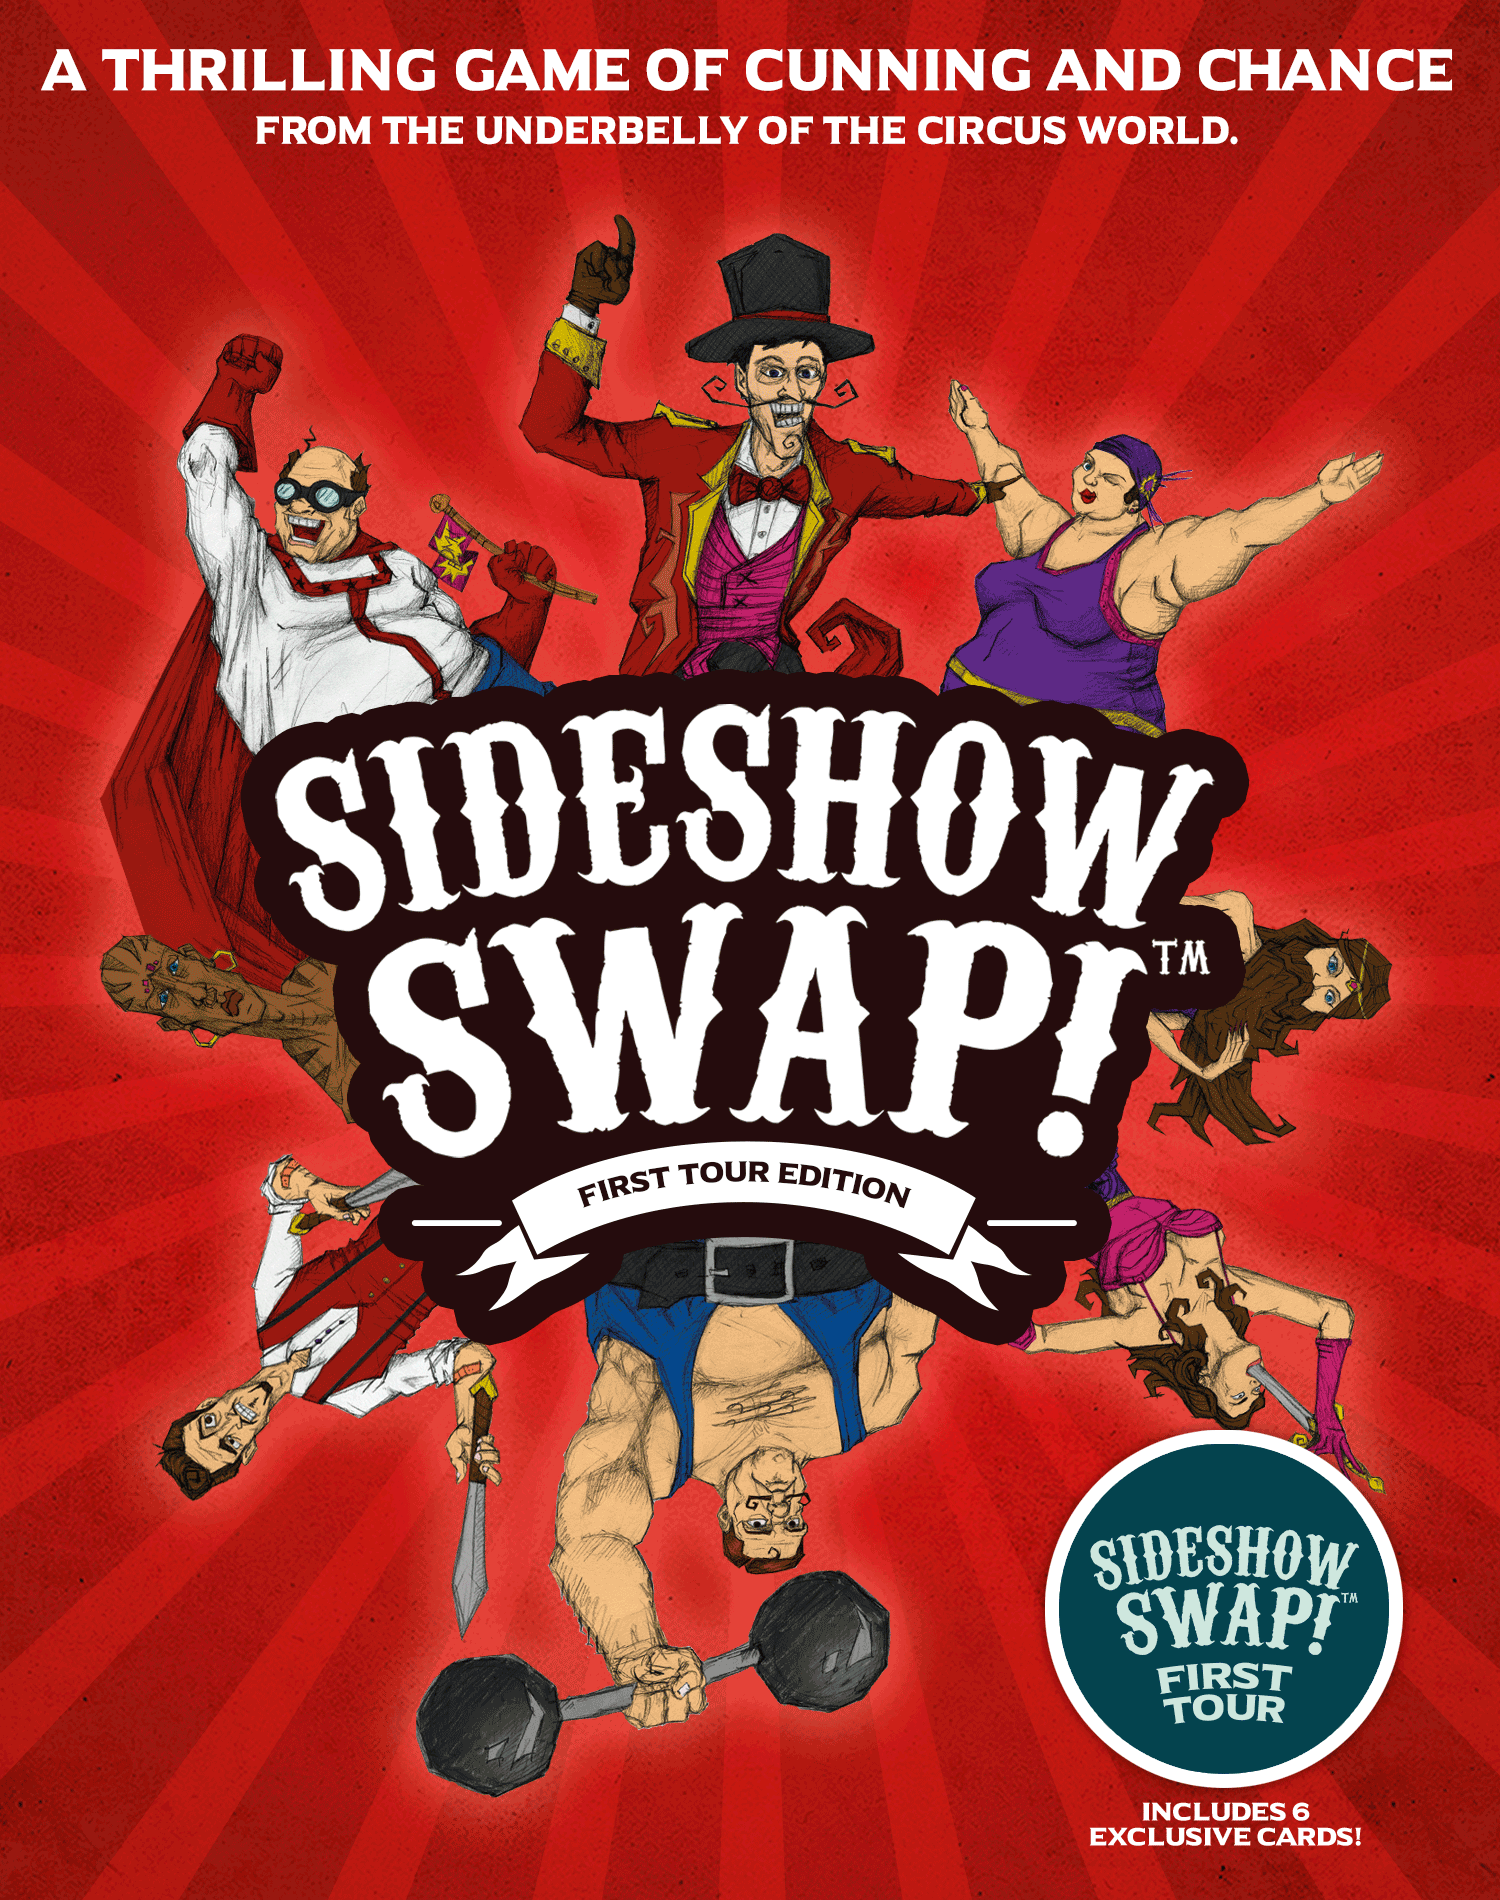 Sideshow Swap! Welcome to the Show!